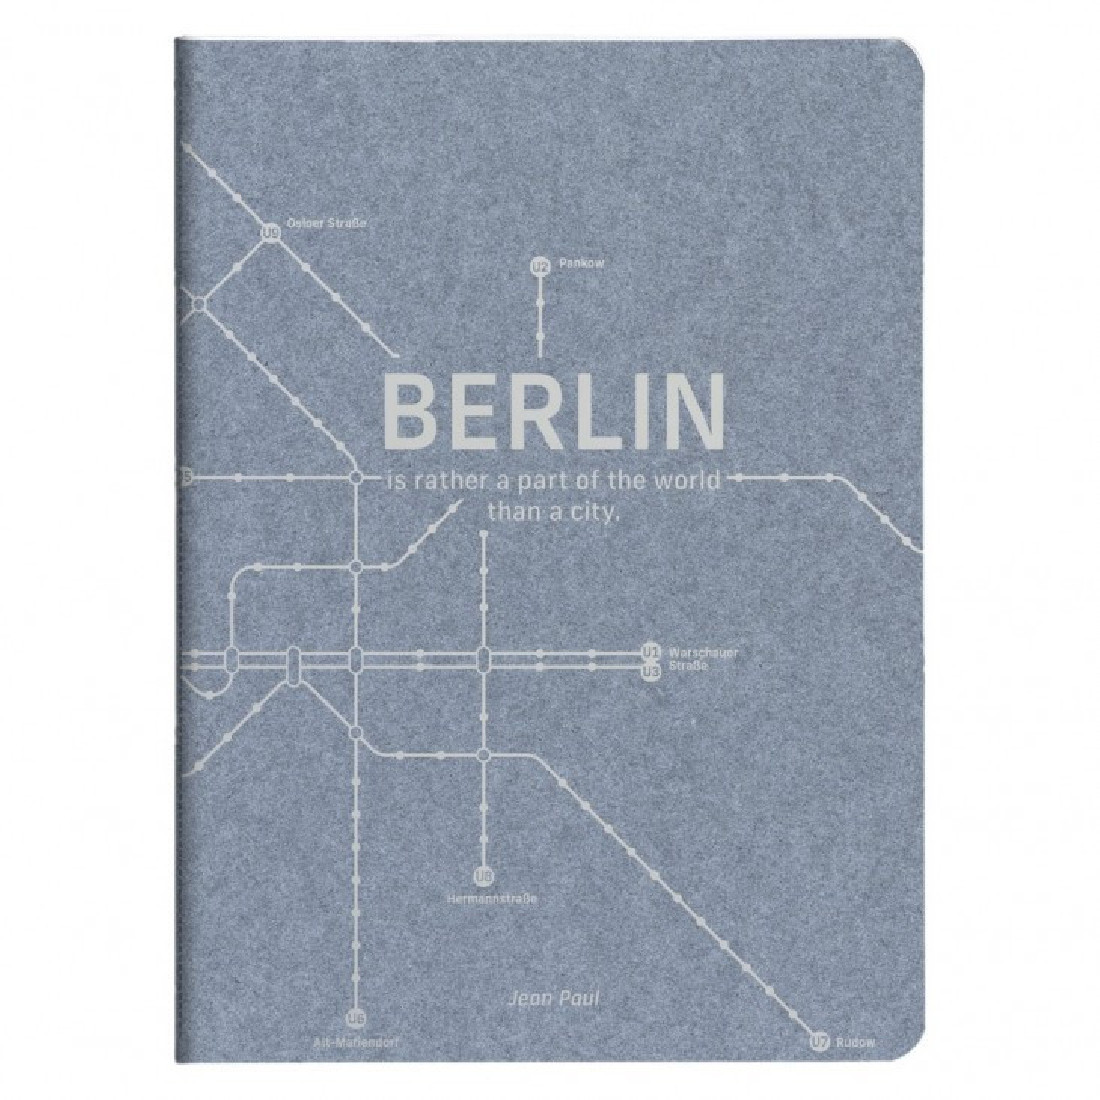 Clairefontaine Rhodia Jeans notebook A5 21x14,8cm, Berlin metro, 90gr, lined, 96 pages, 083533